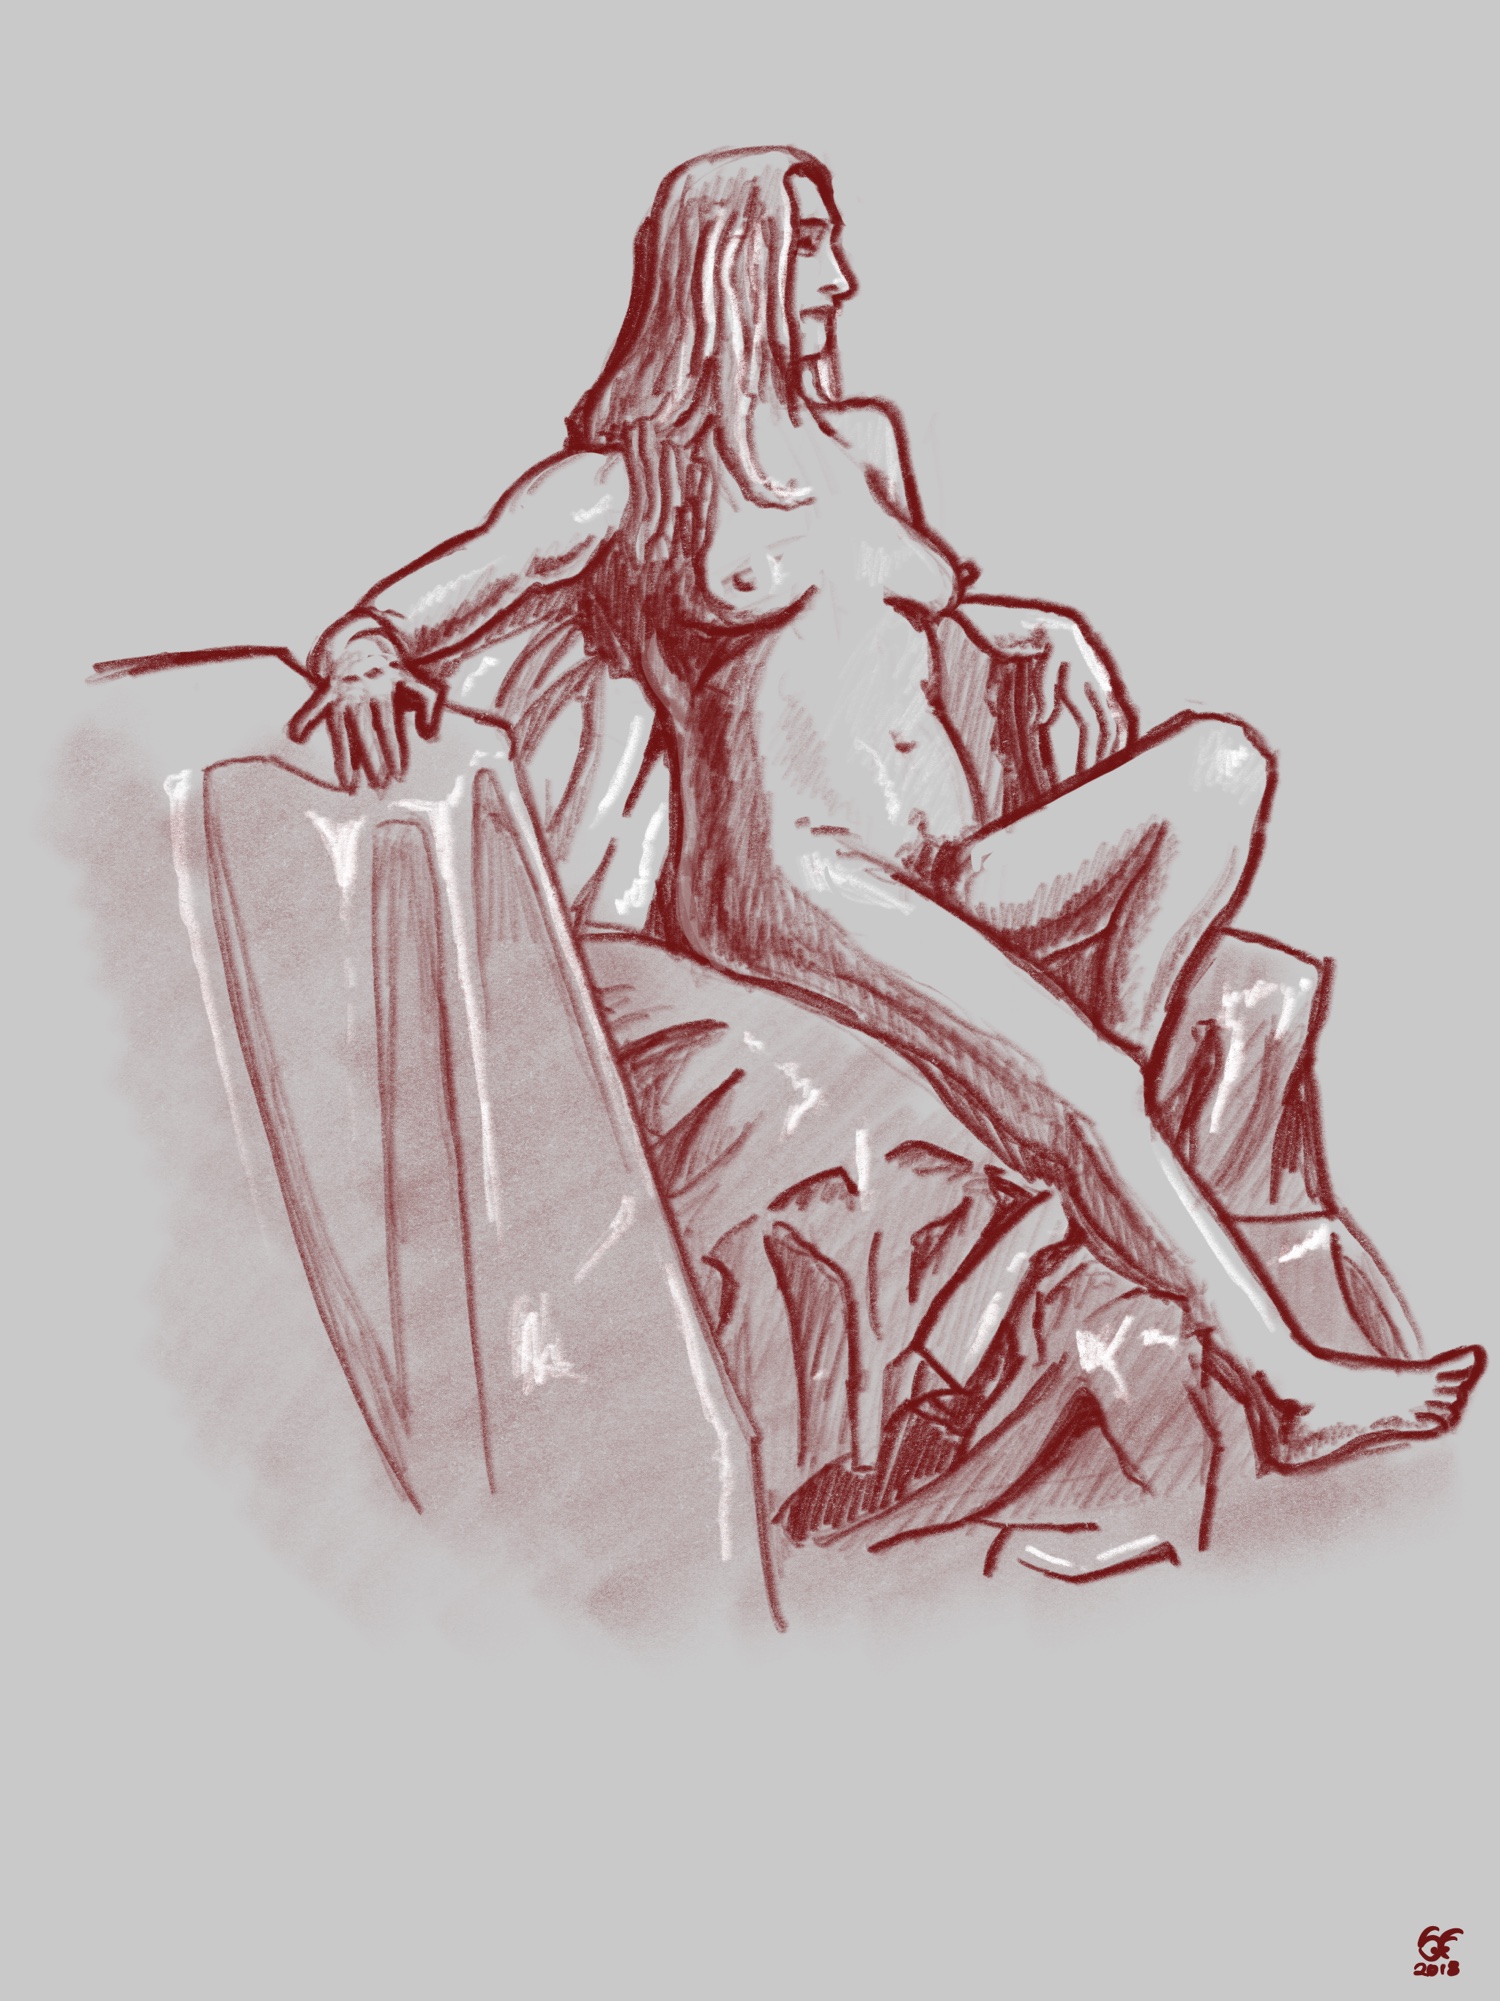 Sketch of a naked woman sitting on shiny fabric, done in red pencil with white highlights on a light gray background.